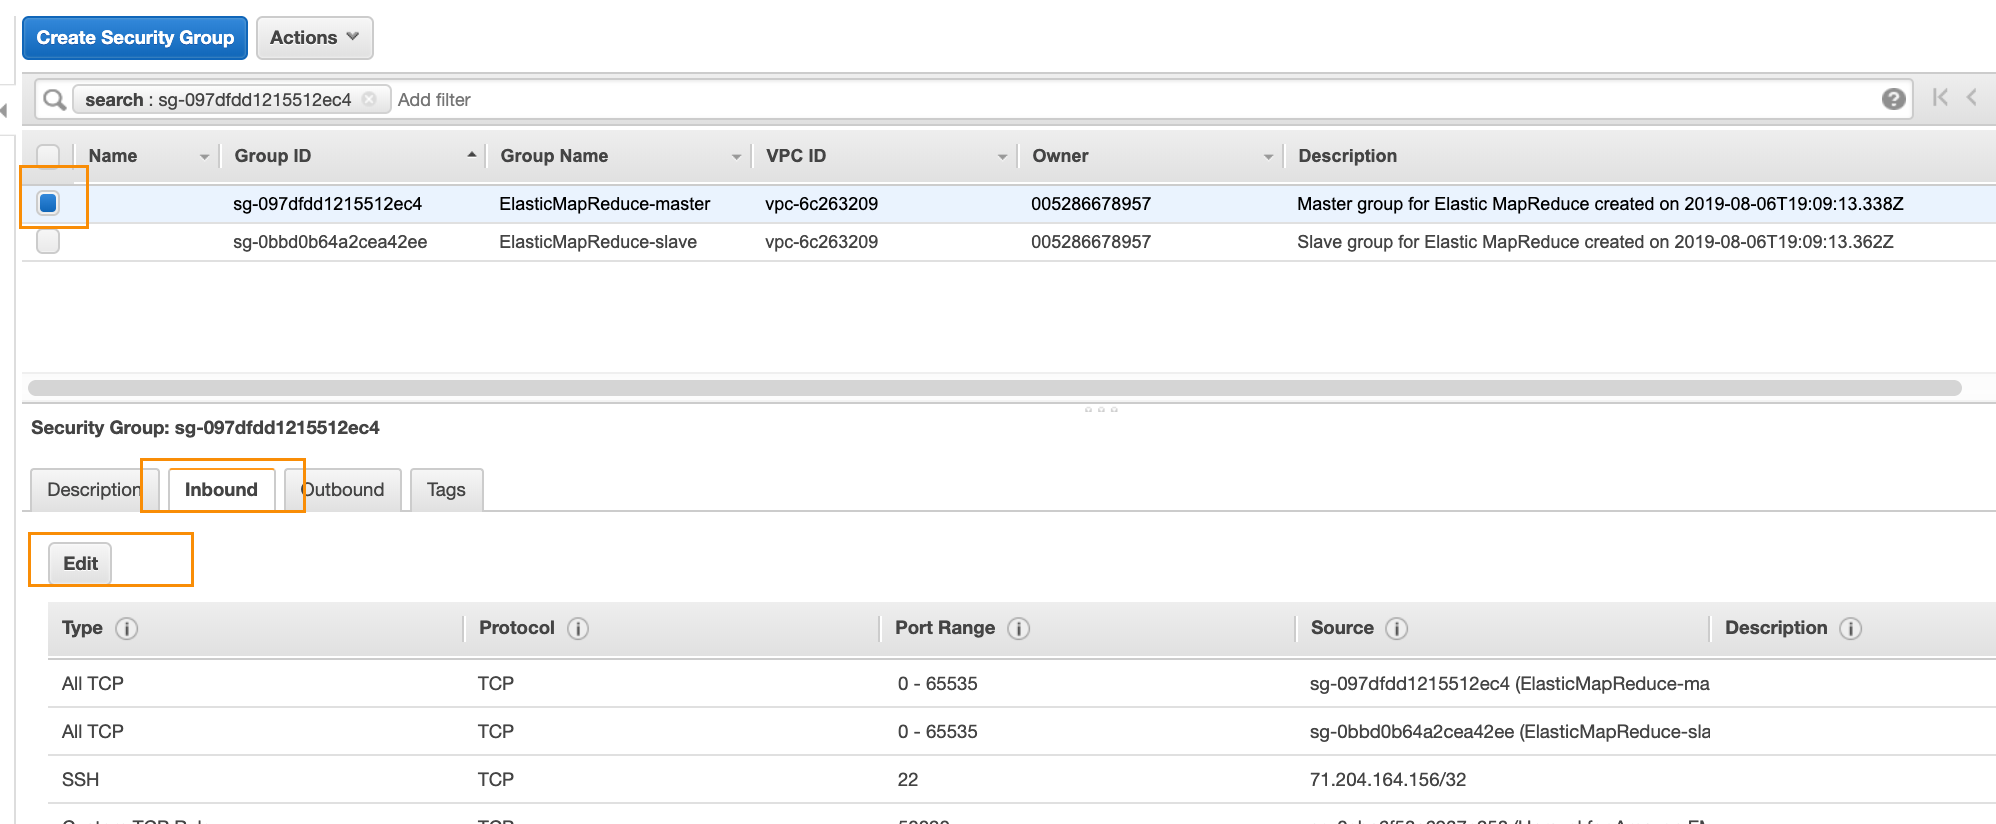 aws-marketplace-step2b-modify-security-group3.png